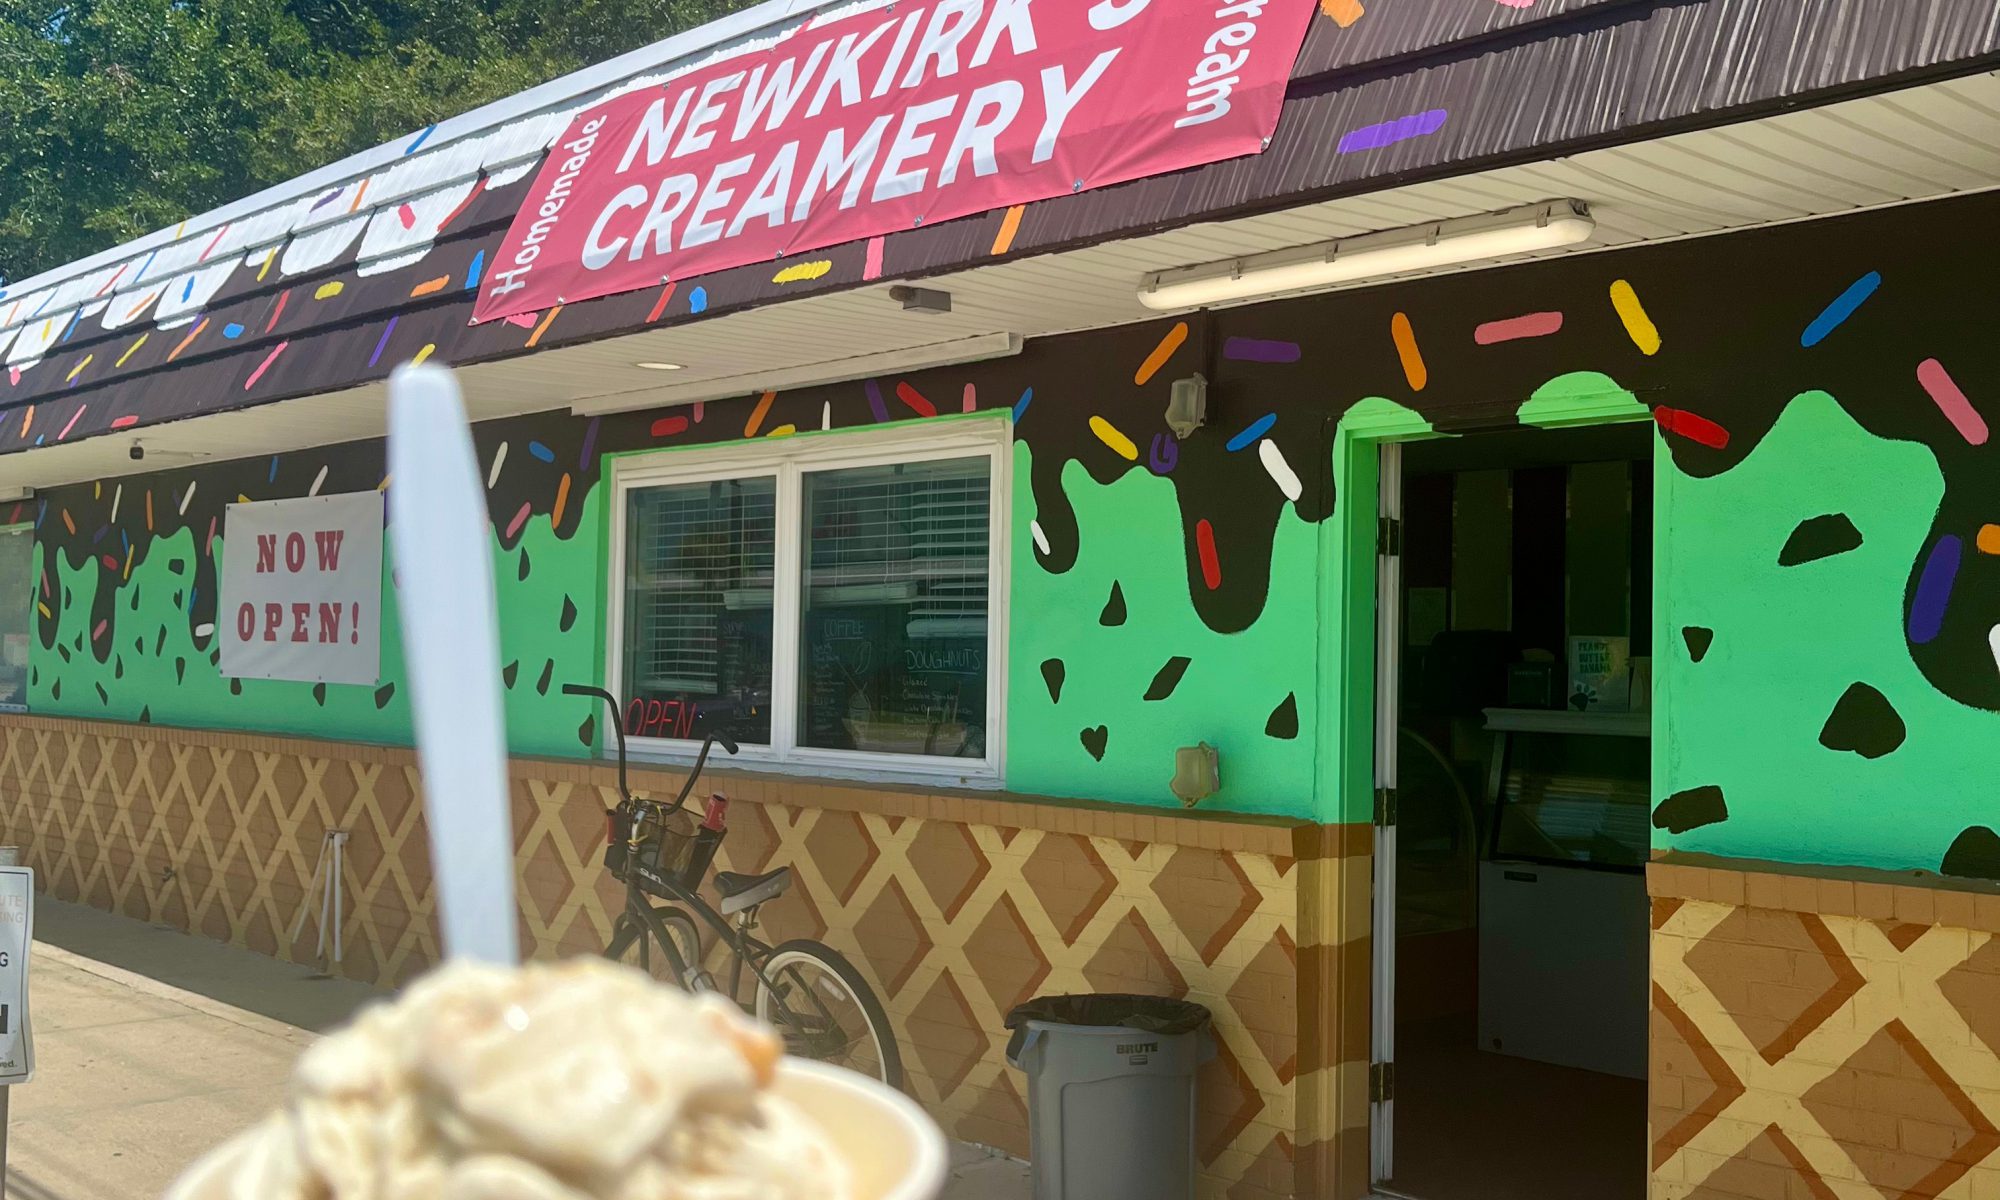 A Tybee Island ice cream spot that's painted to look like their delicious treats